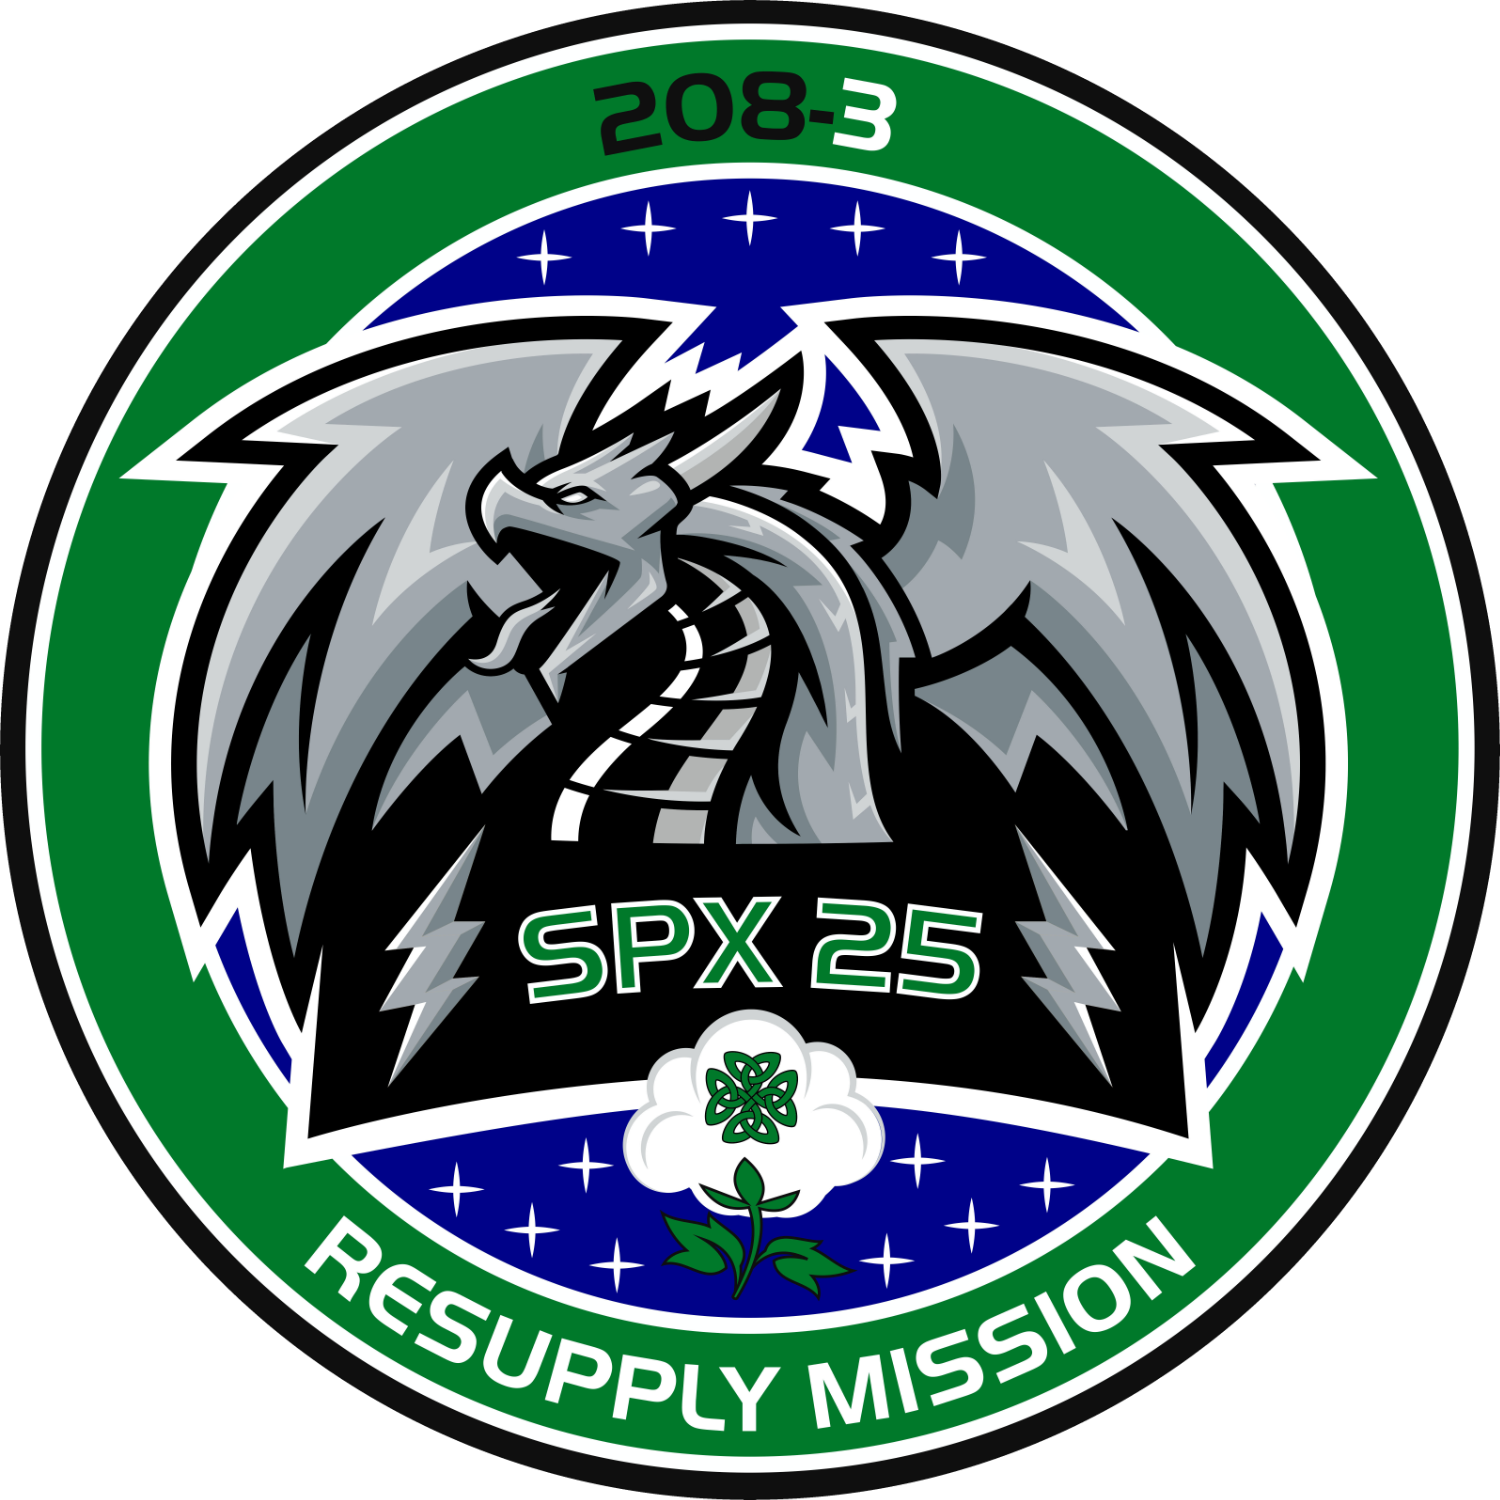 Mission patch for Dragon CRS-2 SpX-25